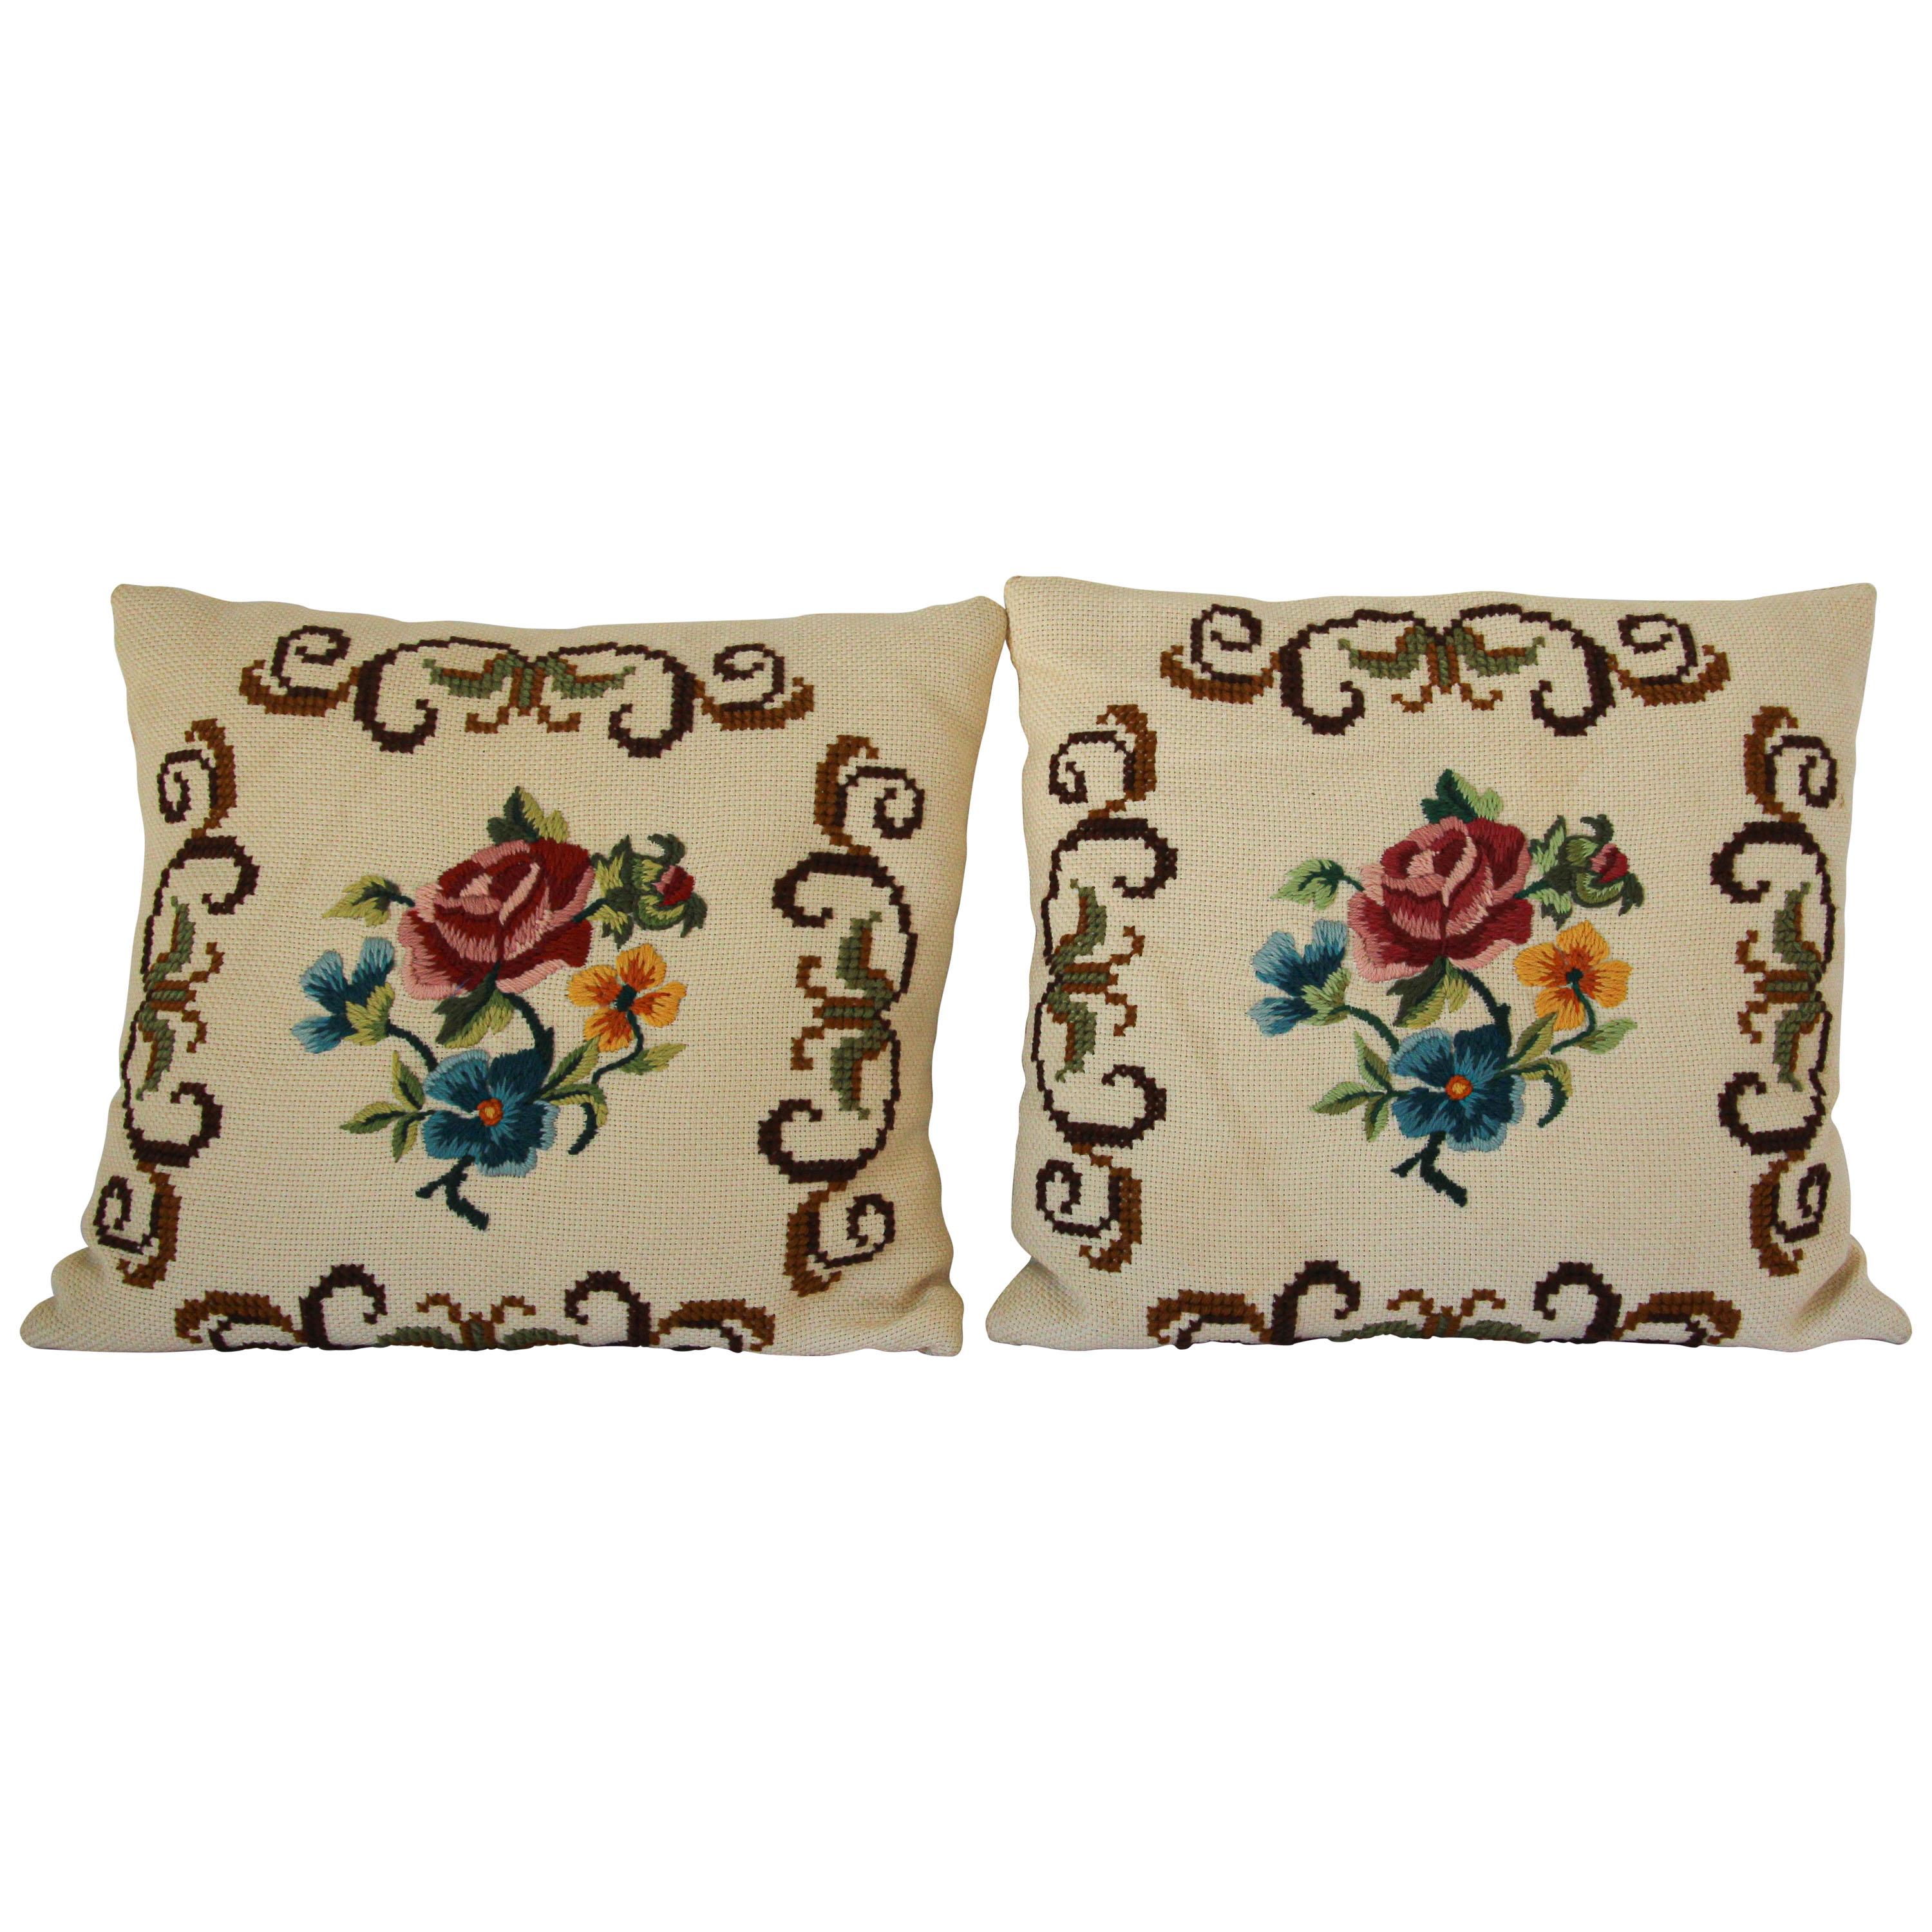 French Provincial Handmade Needlepoint Pillows